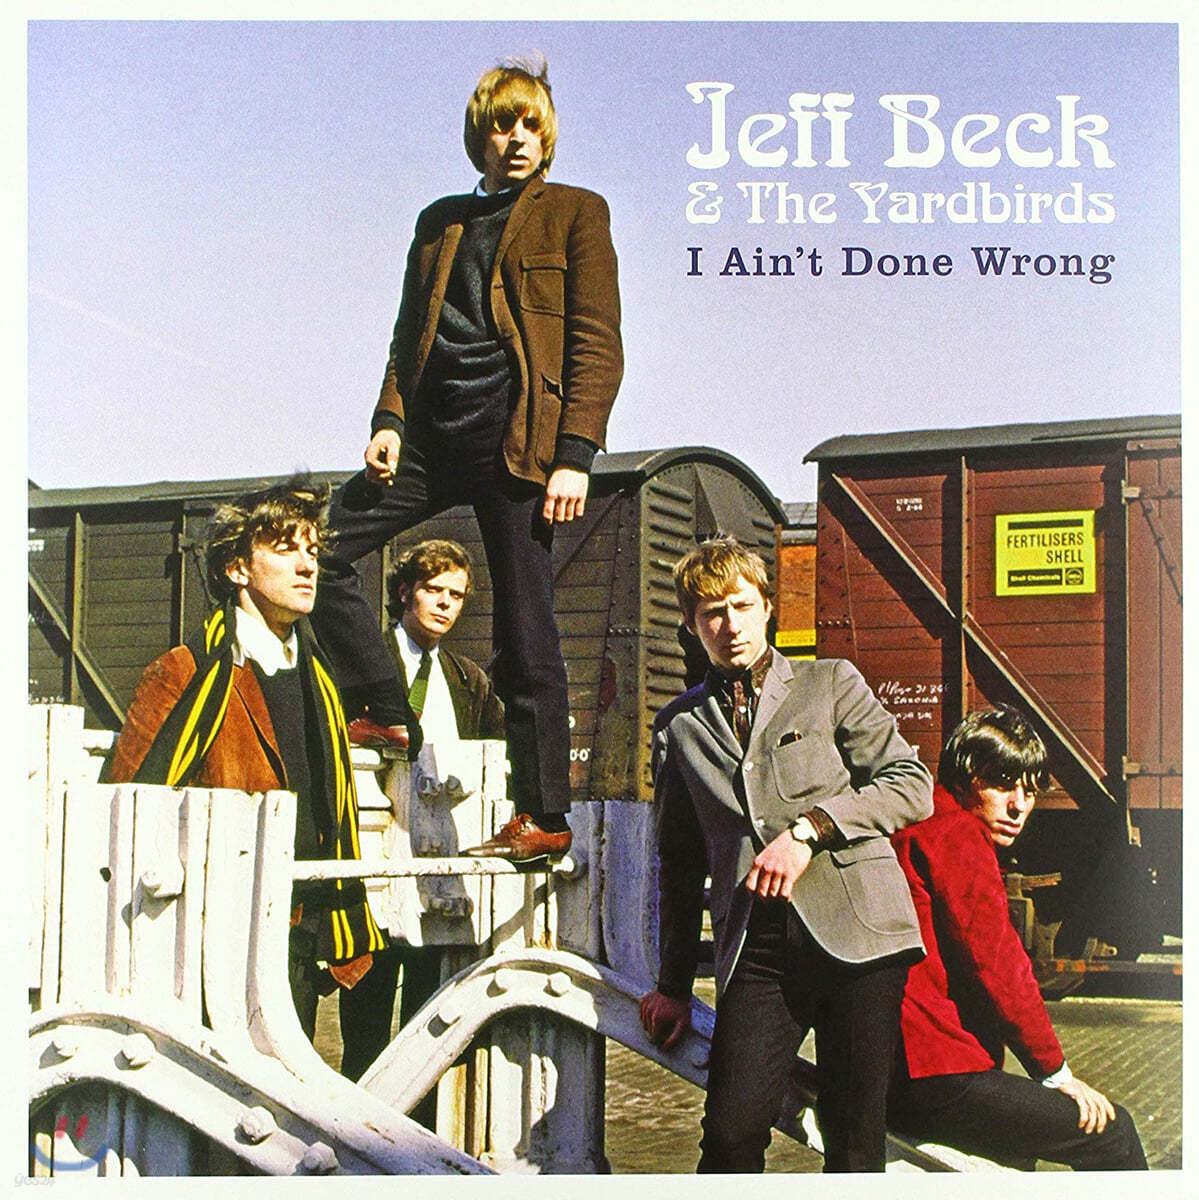 Jeff Beck & The Yardbirds (제프 벡 & 야드버즈) - I Ain’t Done Wrong [LP]